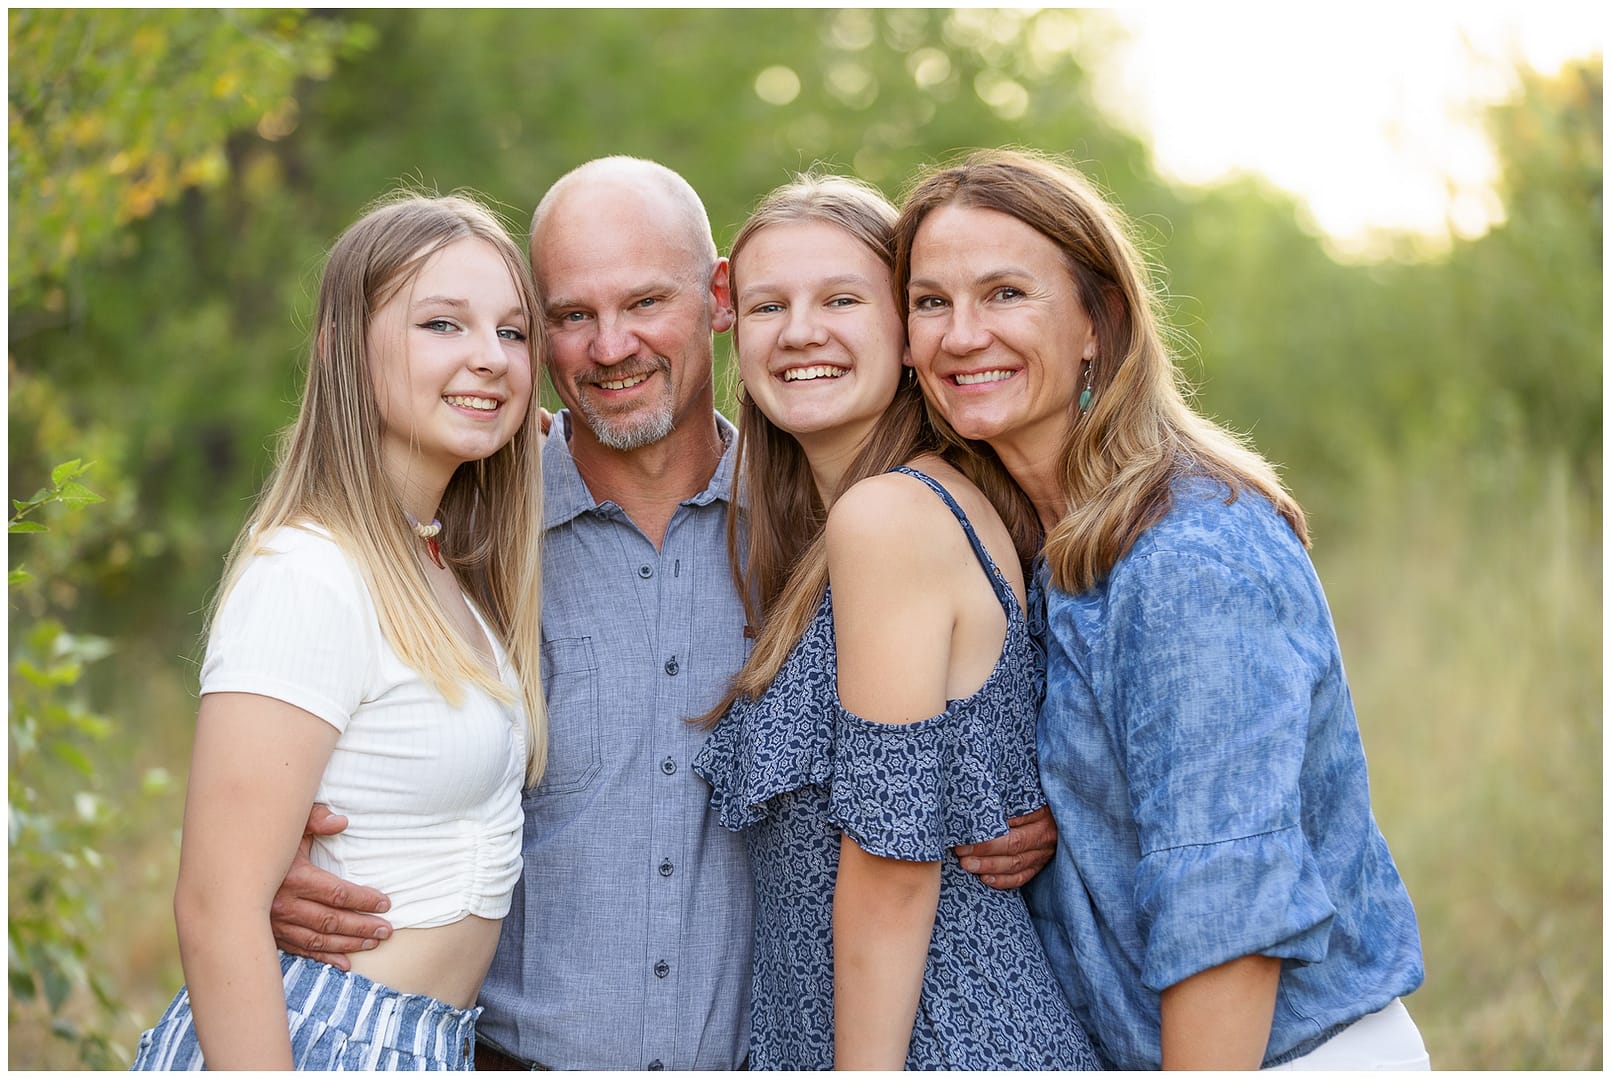 Family squeezes in for a close portrait. Photo by Tiffany Hix Photography.